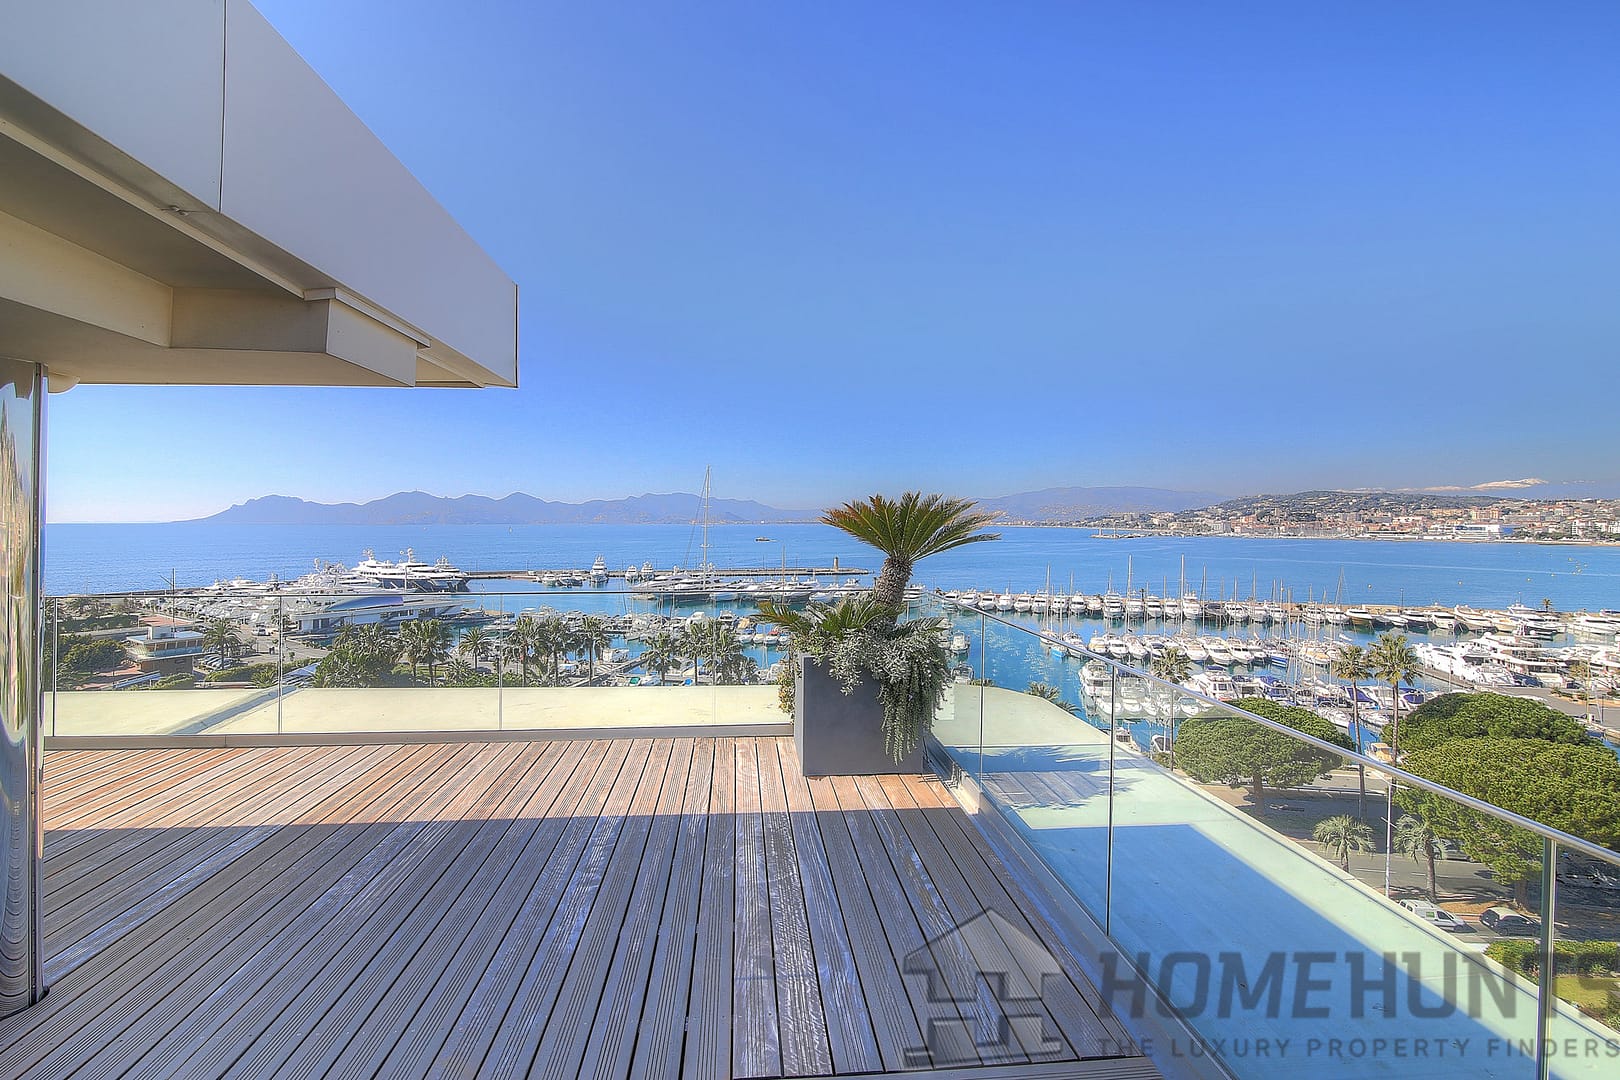 5 Bedroom Apartment in Cannes 4